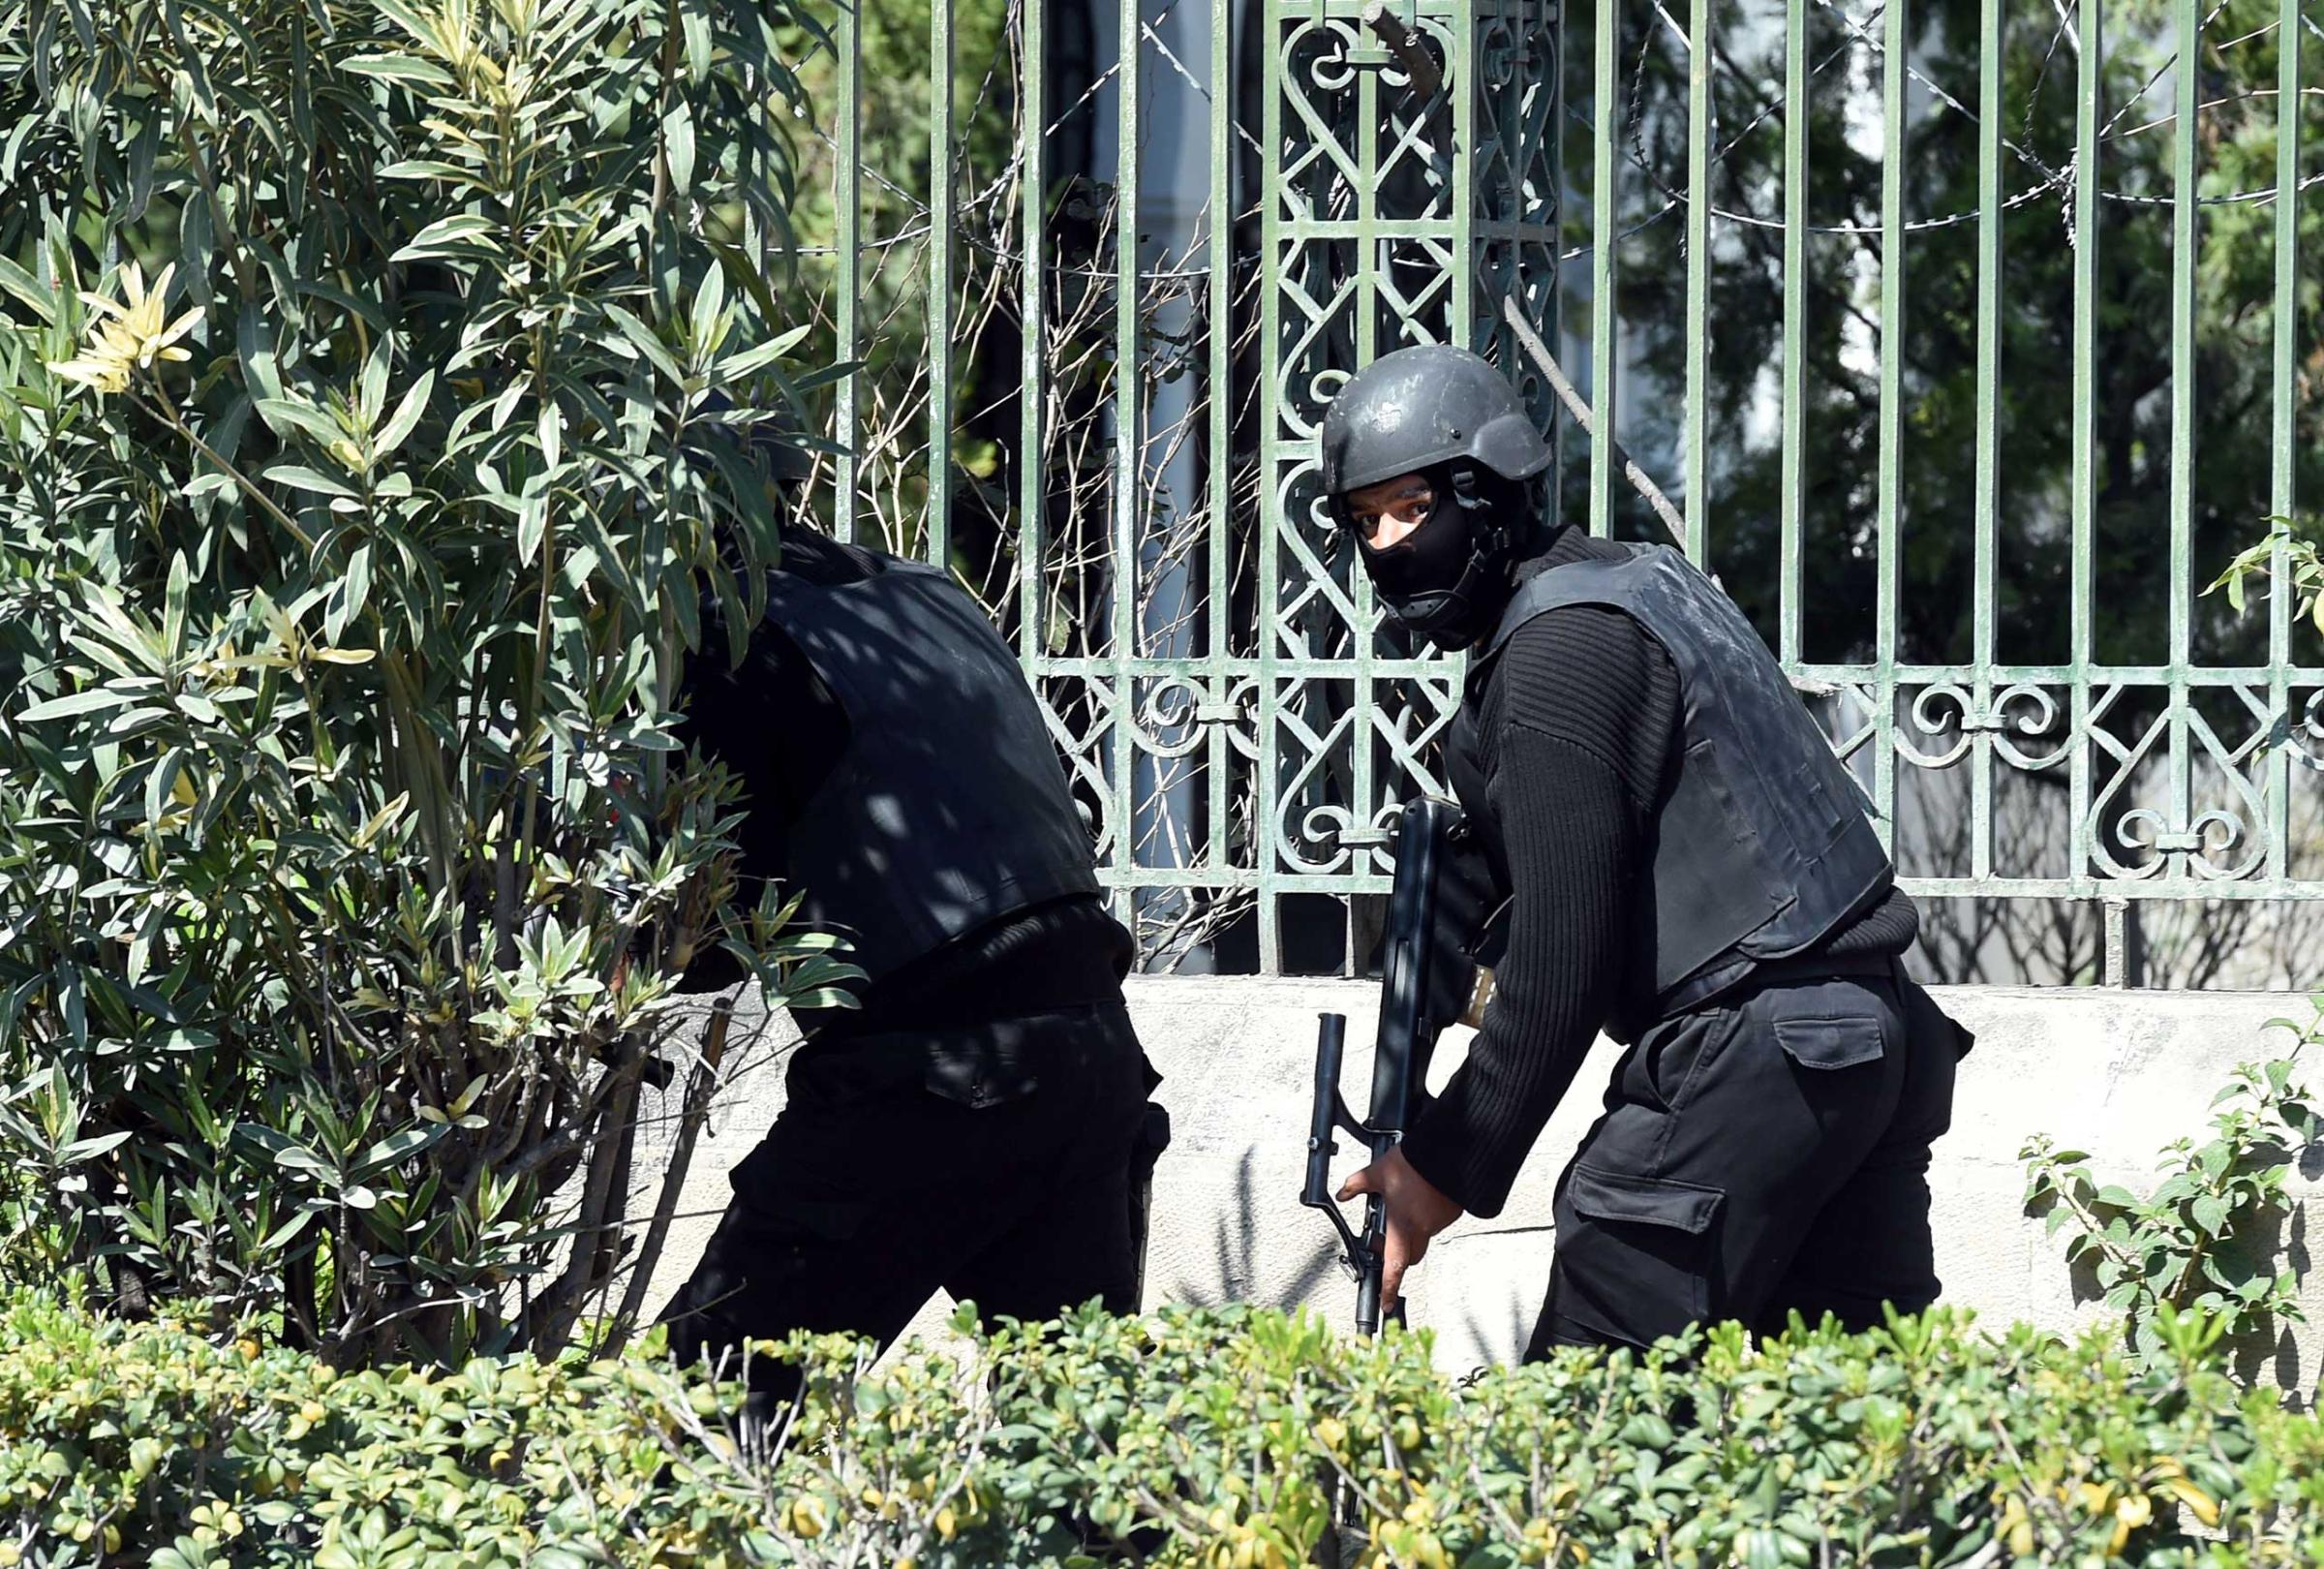 Tunisian security forces secure the area after gunmen attacked Tunis' famed Bardo Museum on March 18, 2015.